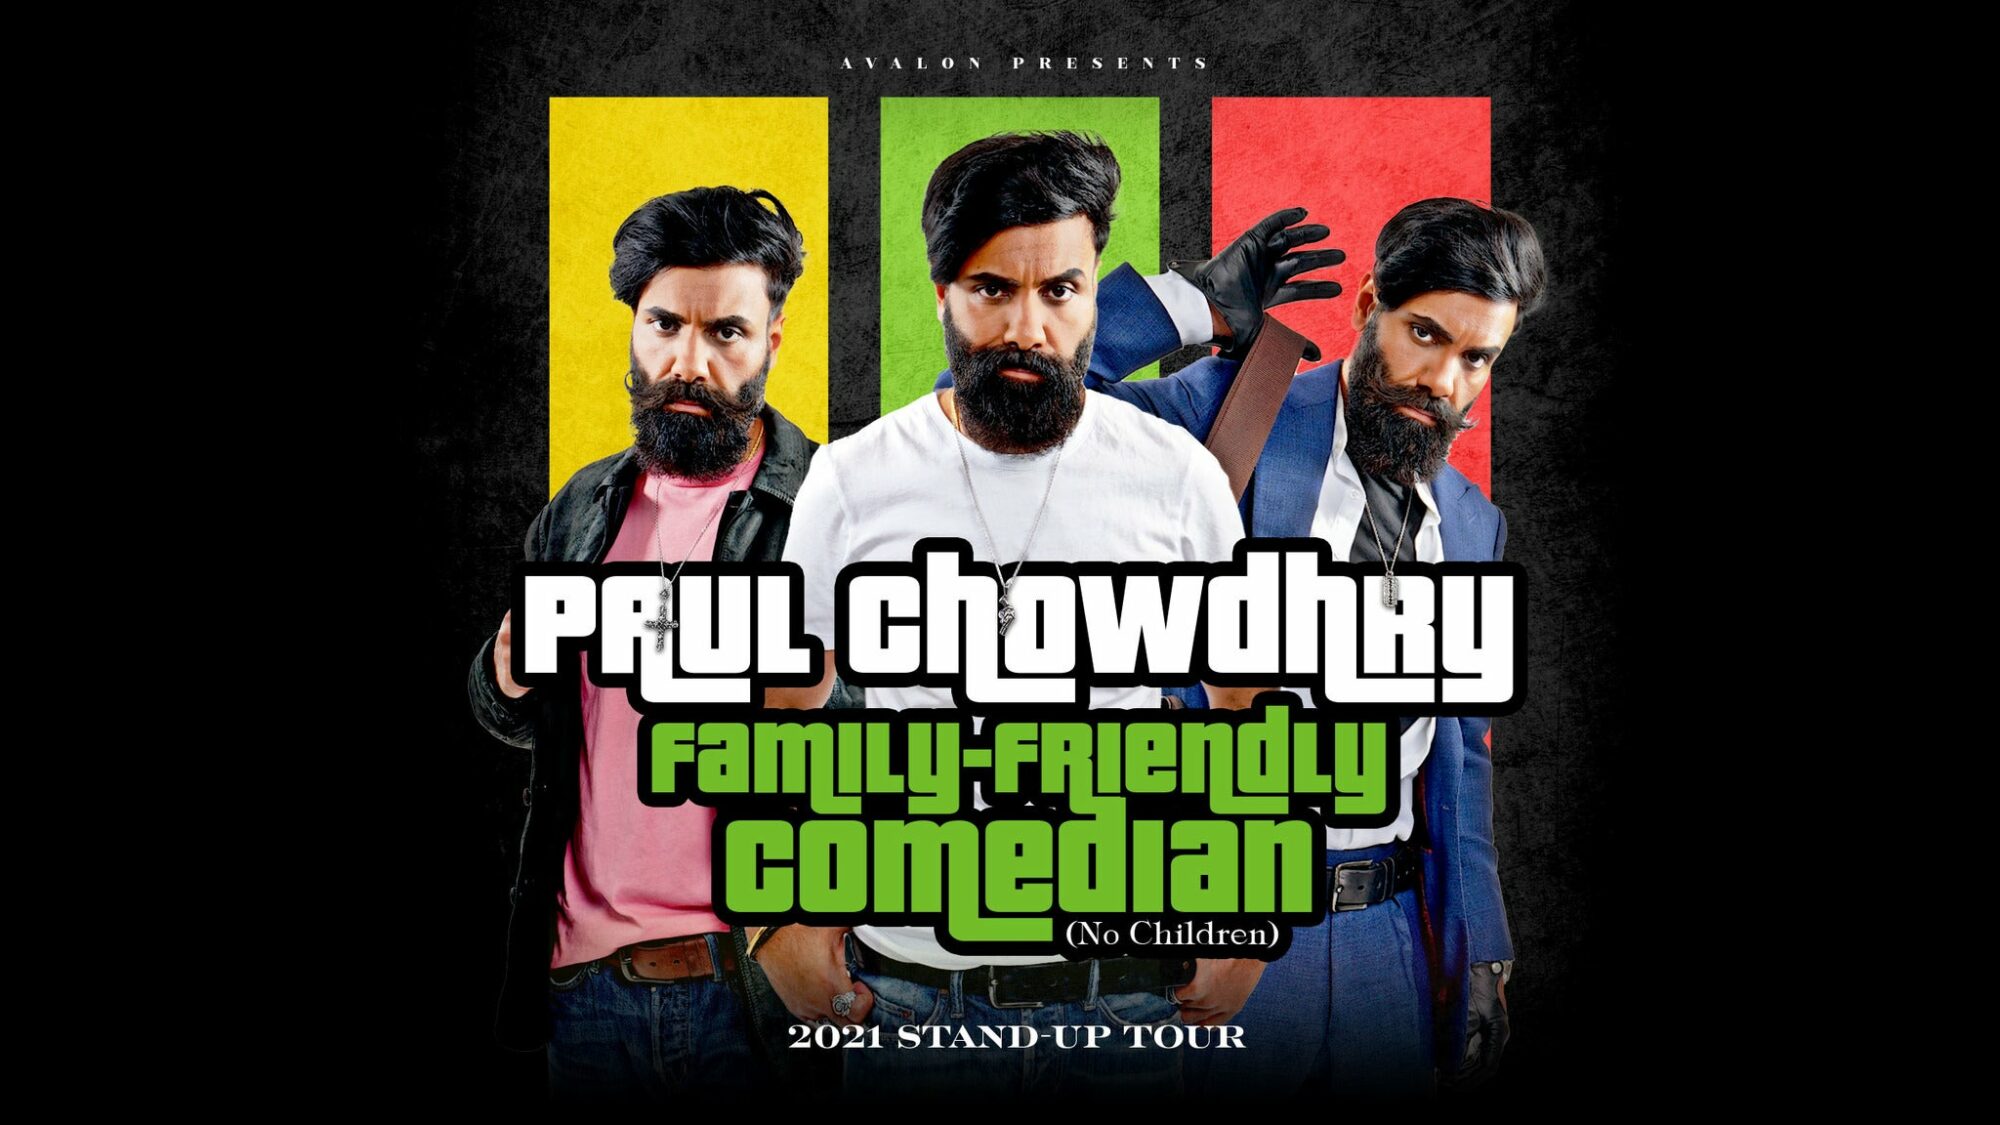 Image name Paul Chowdhry Family Friendly Comedian at St Georges Hall Bradford Bradford the 24 image from the post Paul Chowdhry: Family Friendly Comedian at Hull City Hall, Hull in Yorkshire.com.